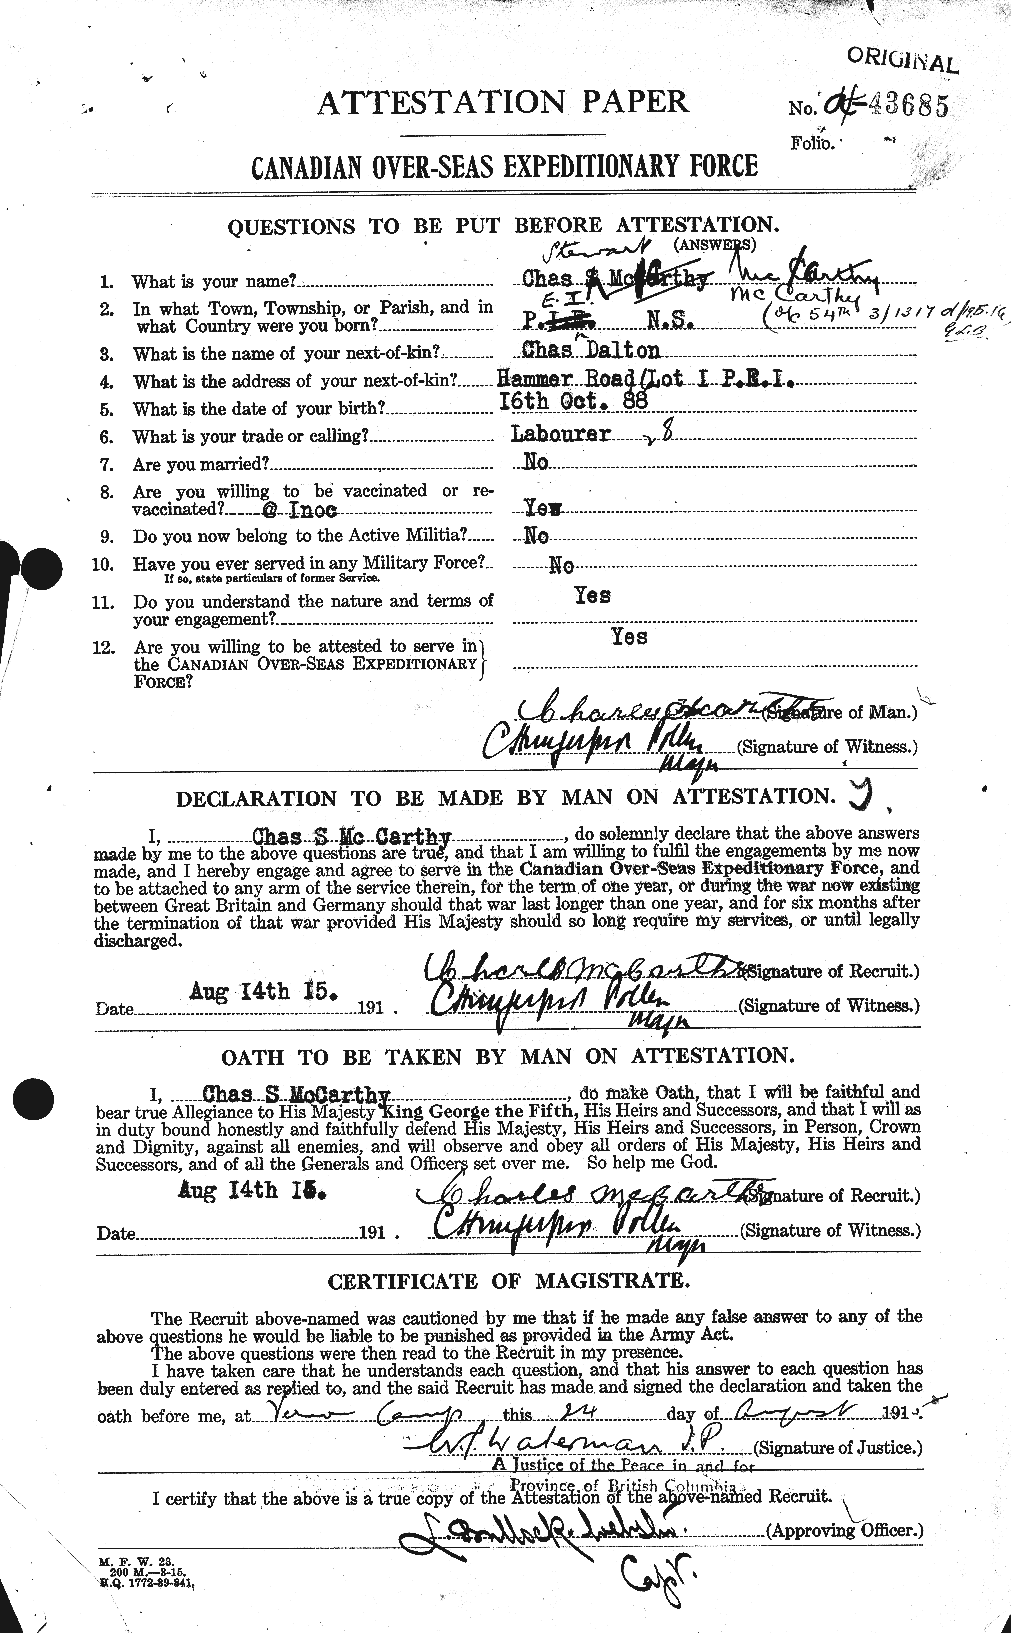 Personnel Records of the First World War - CEF 132304a